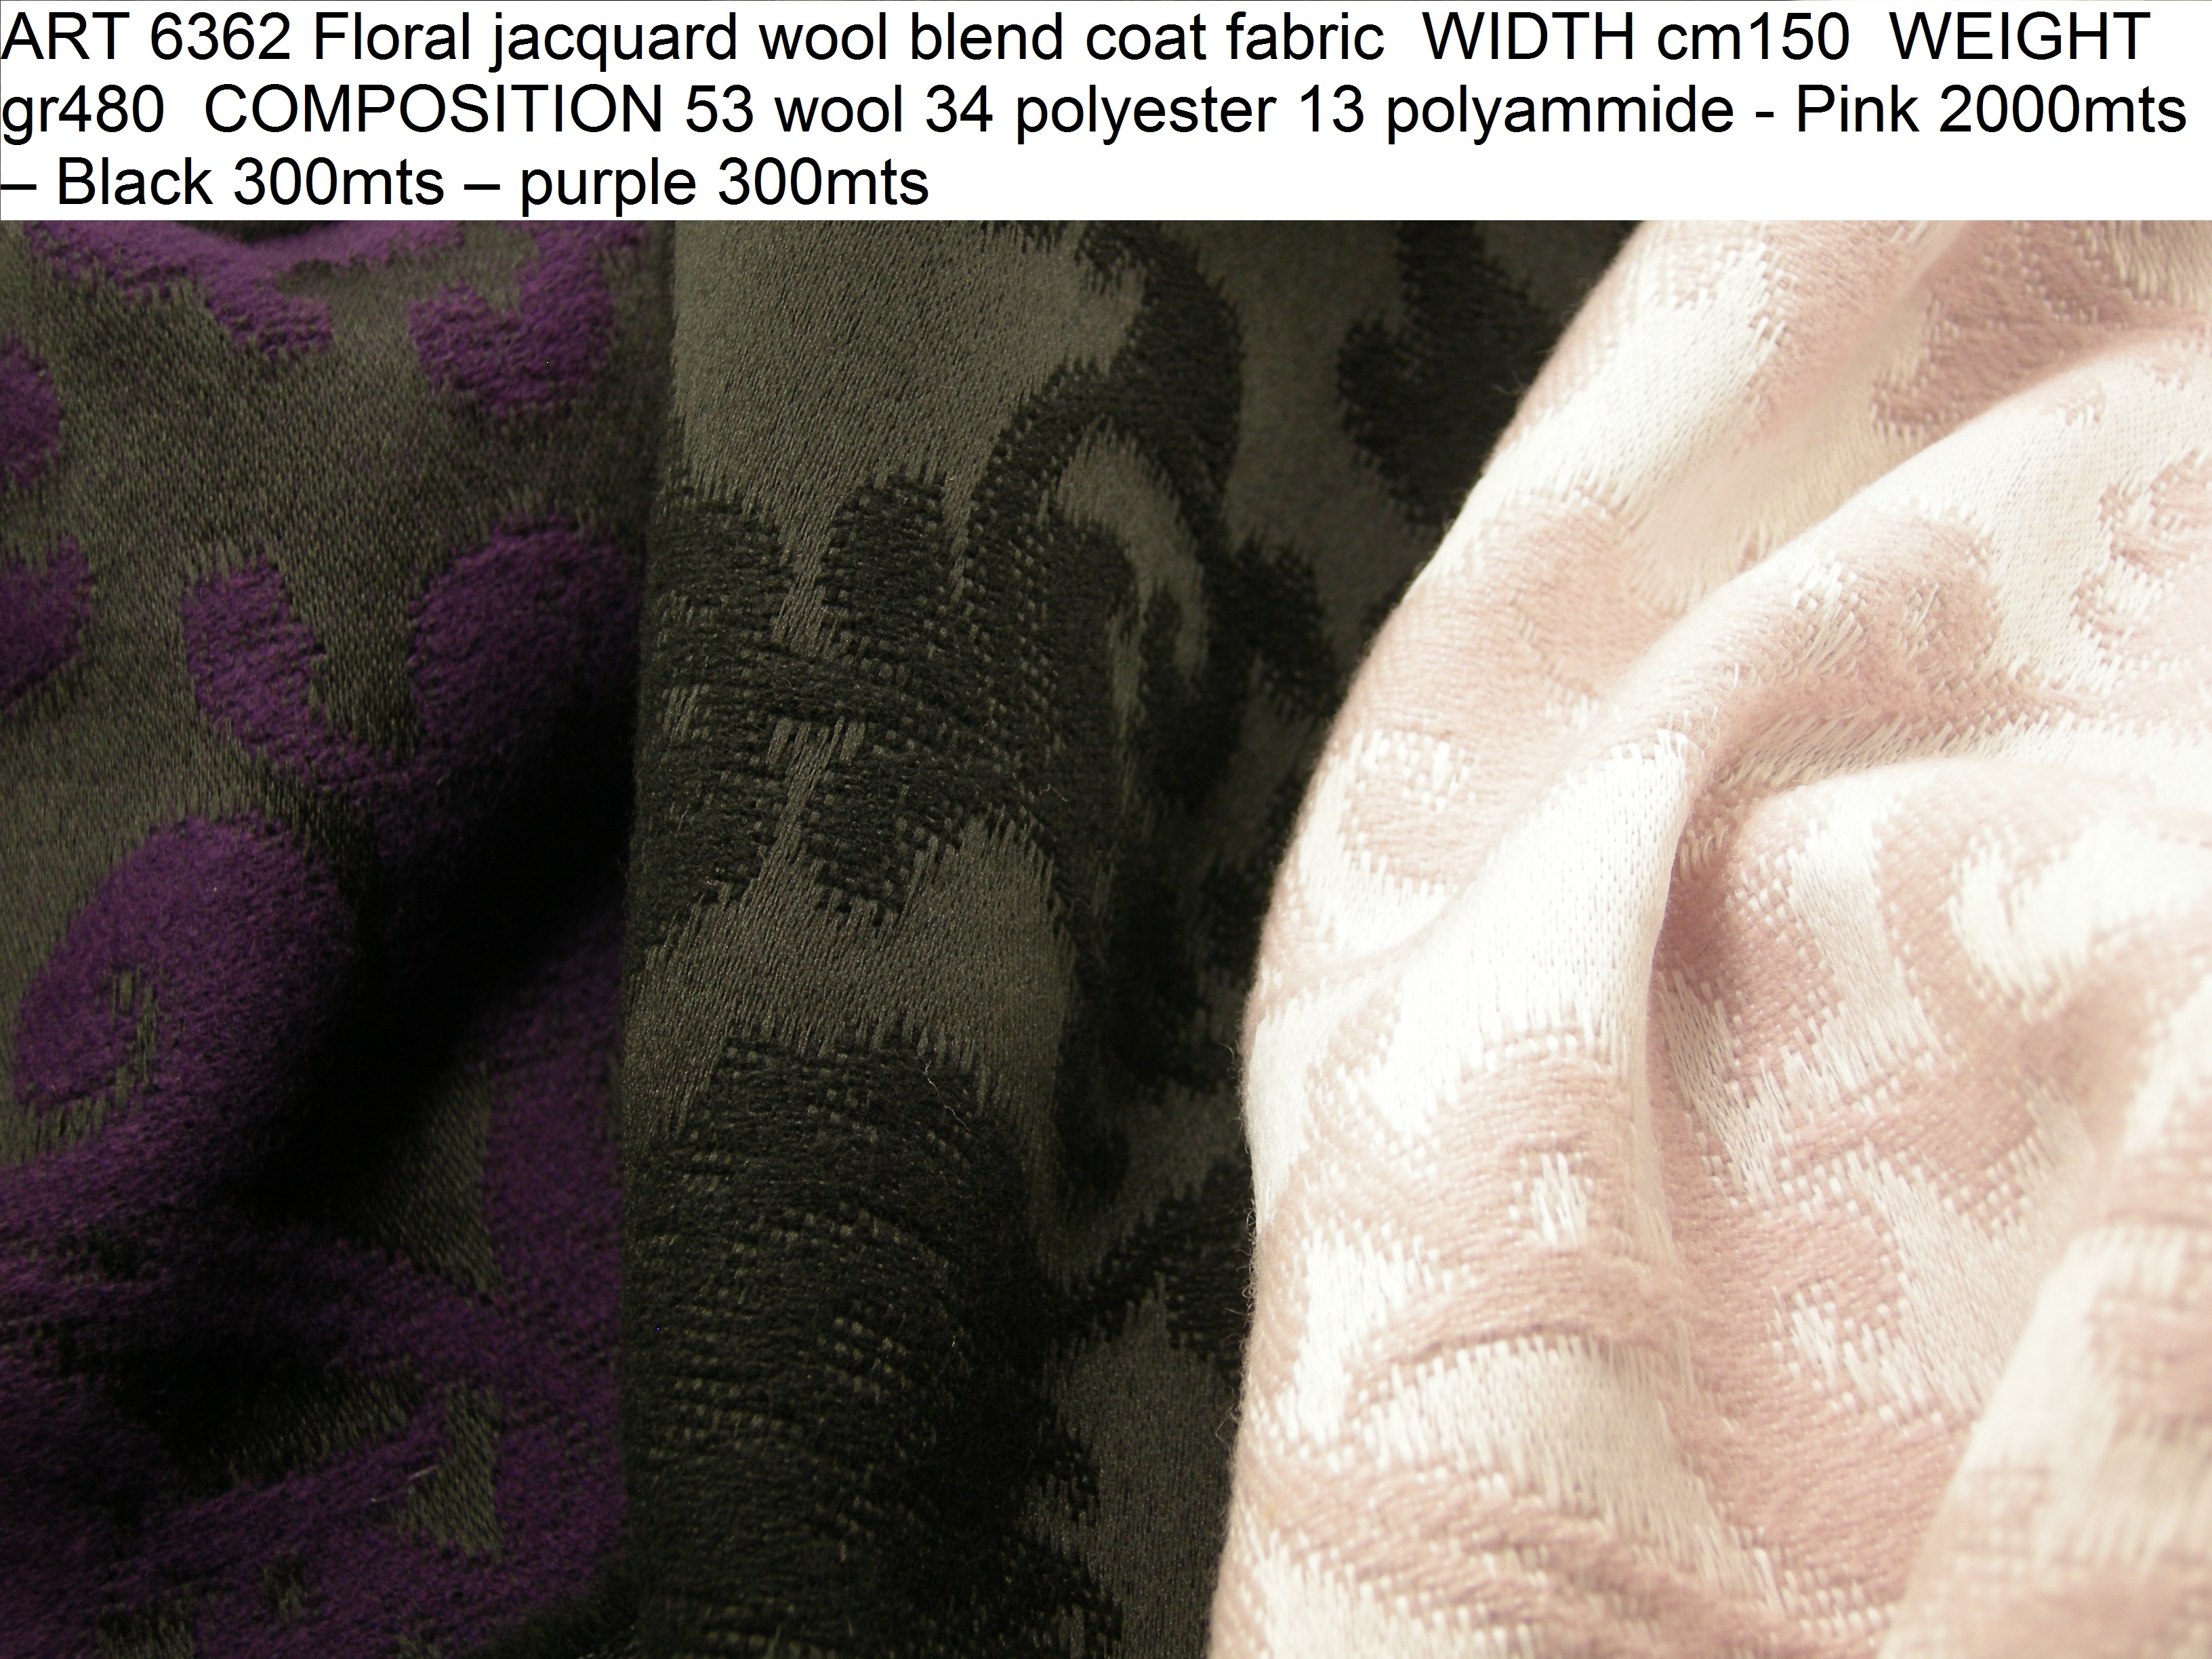 ART 6362 Floral jacquard wool blend coat fabric WIDTH cm150 WEIGHT gr480 COMPOSITION 53 wool 34 polyester 13 polyammide - Pink 2000mts – Black 300mts – purple 300mts